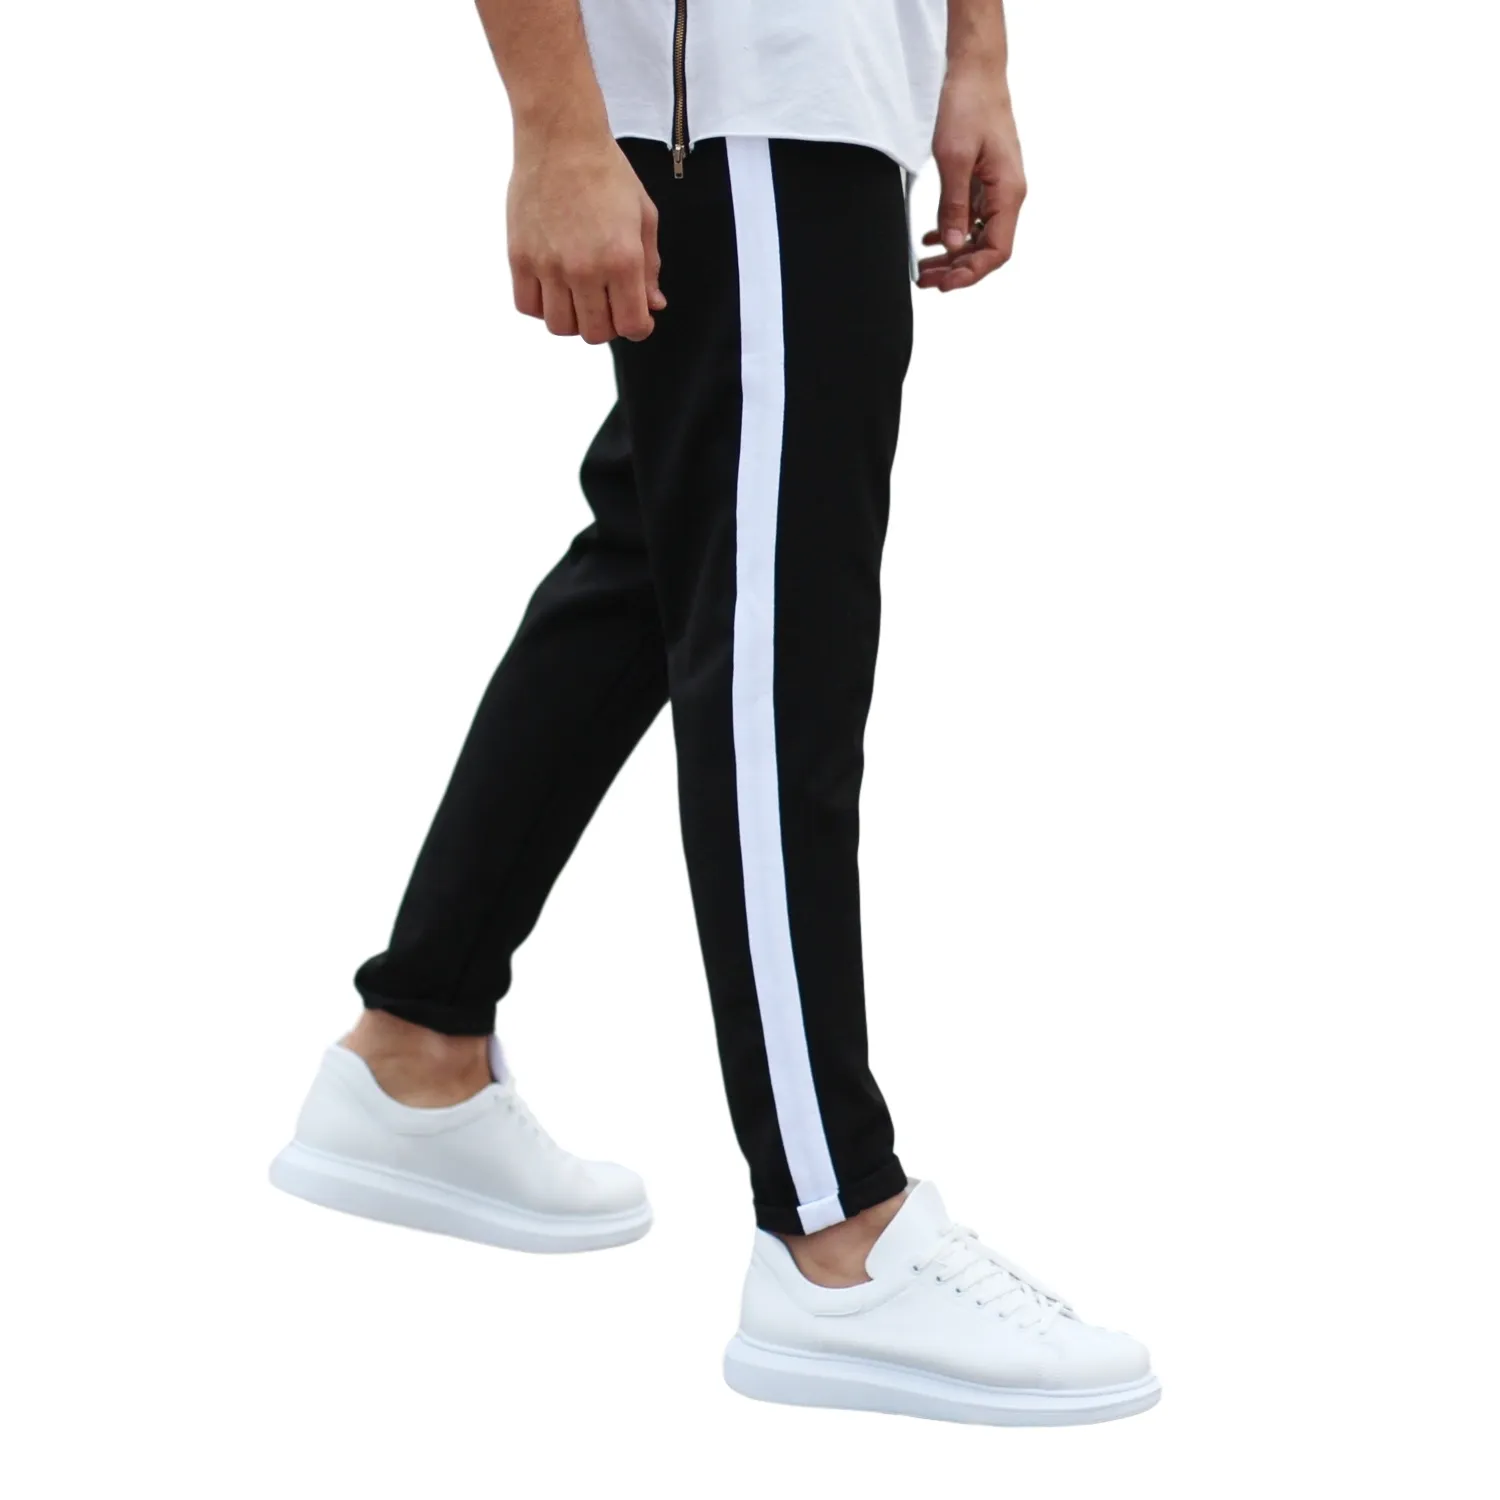 100% Cotton Oversize Mens Black Sweat Pants With Side Stripes New Style Best Price High Quality with Wholesale Offer Trend 2022